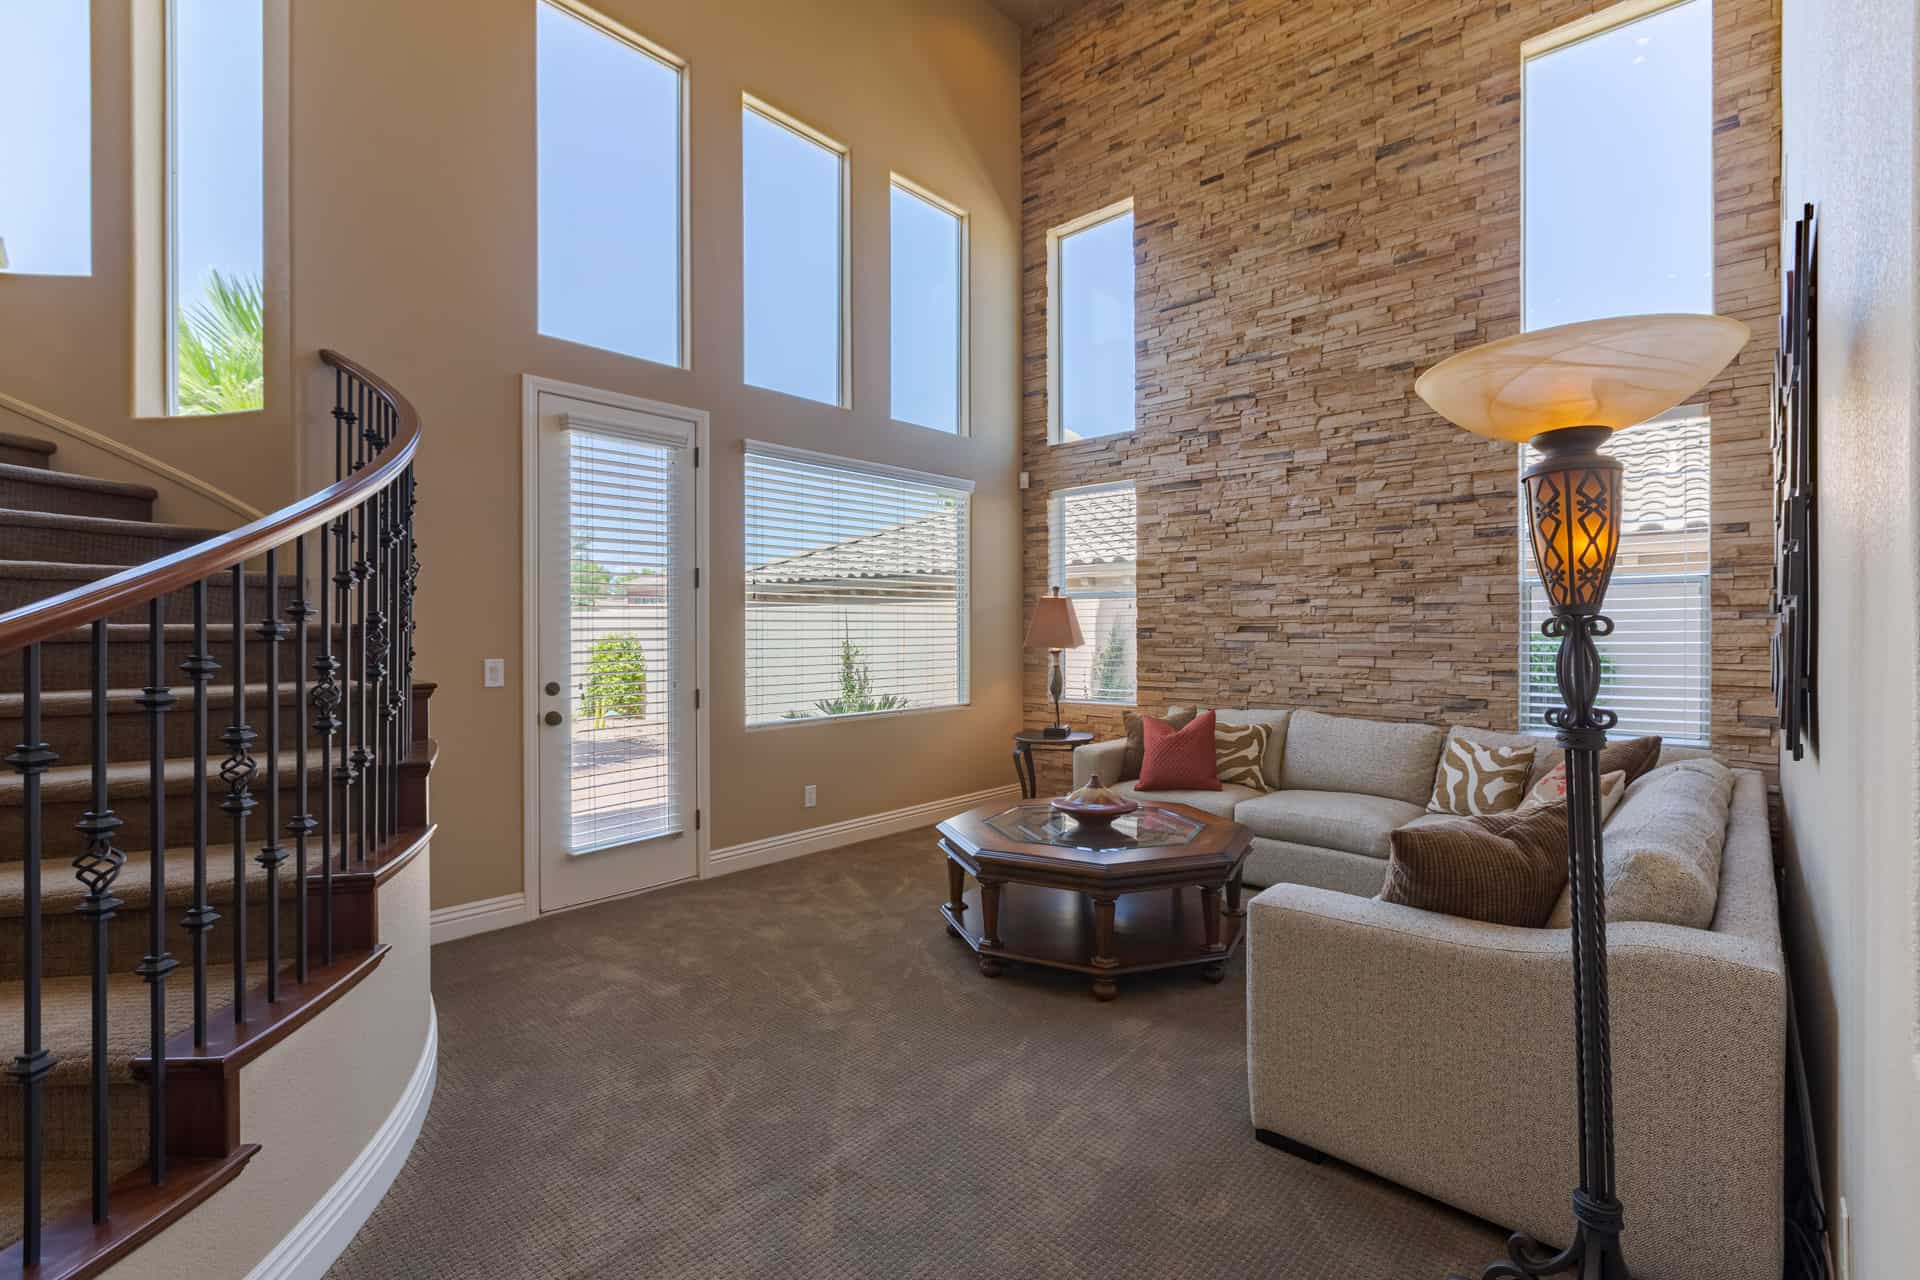 las-vegas-luxry-real-estate-realtor-rob-jensen-company-11434-glowing-sunset-lane-red-rock-country-club11